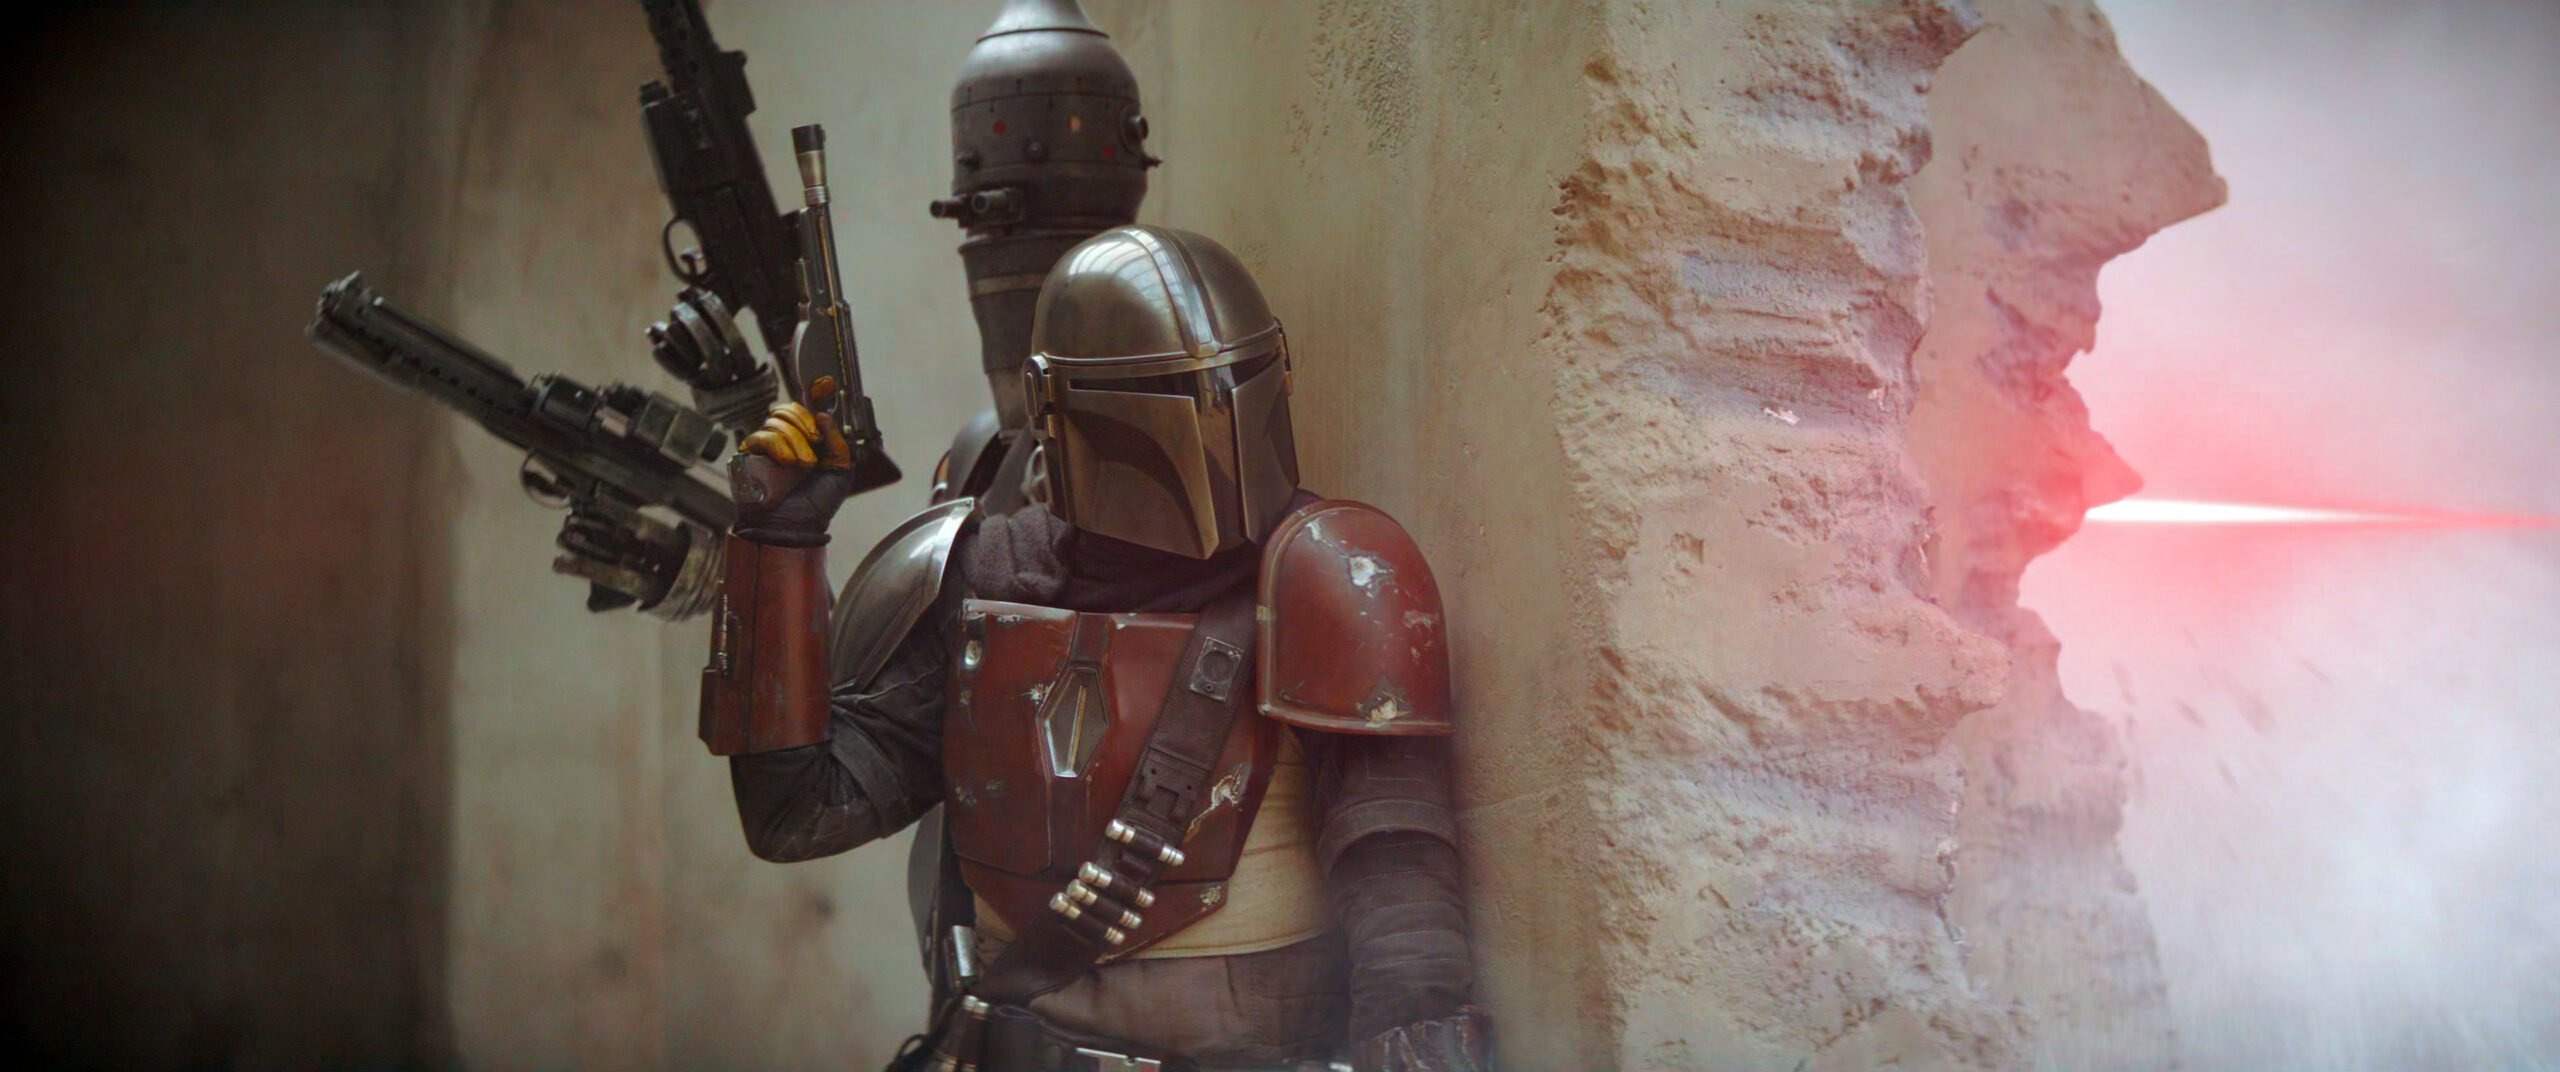 Image from "The Mandalorian" in which IG11 and the title character are involved in a shootout